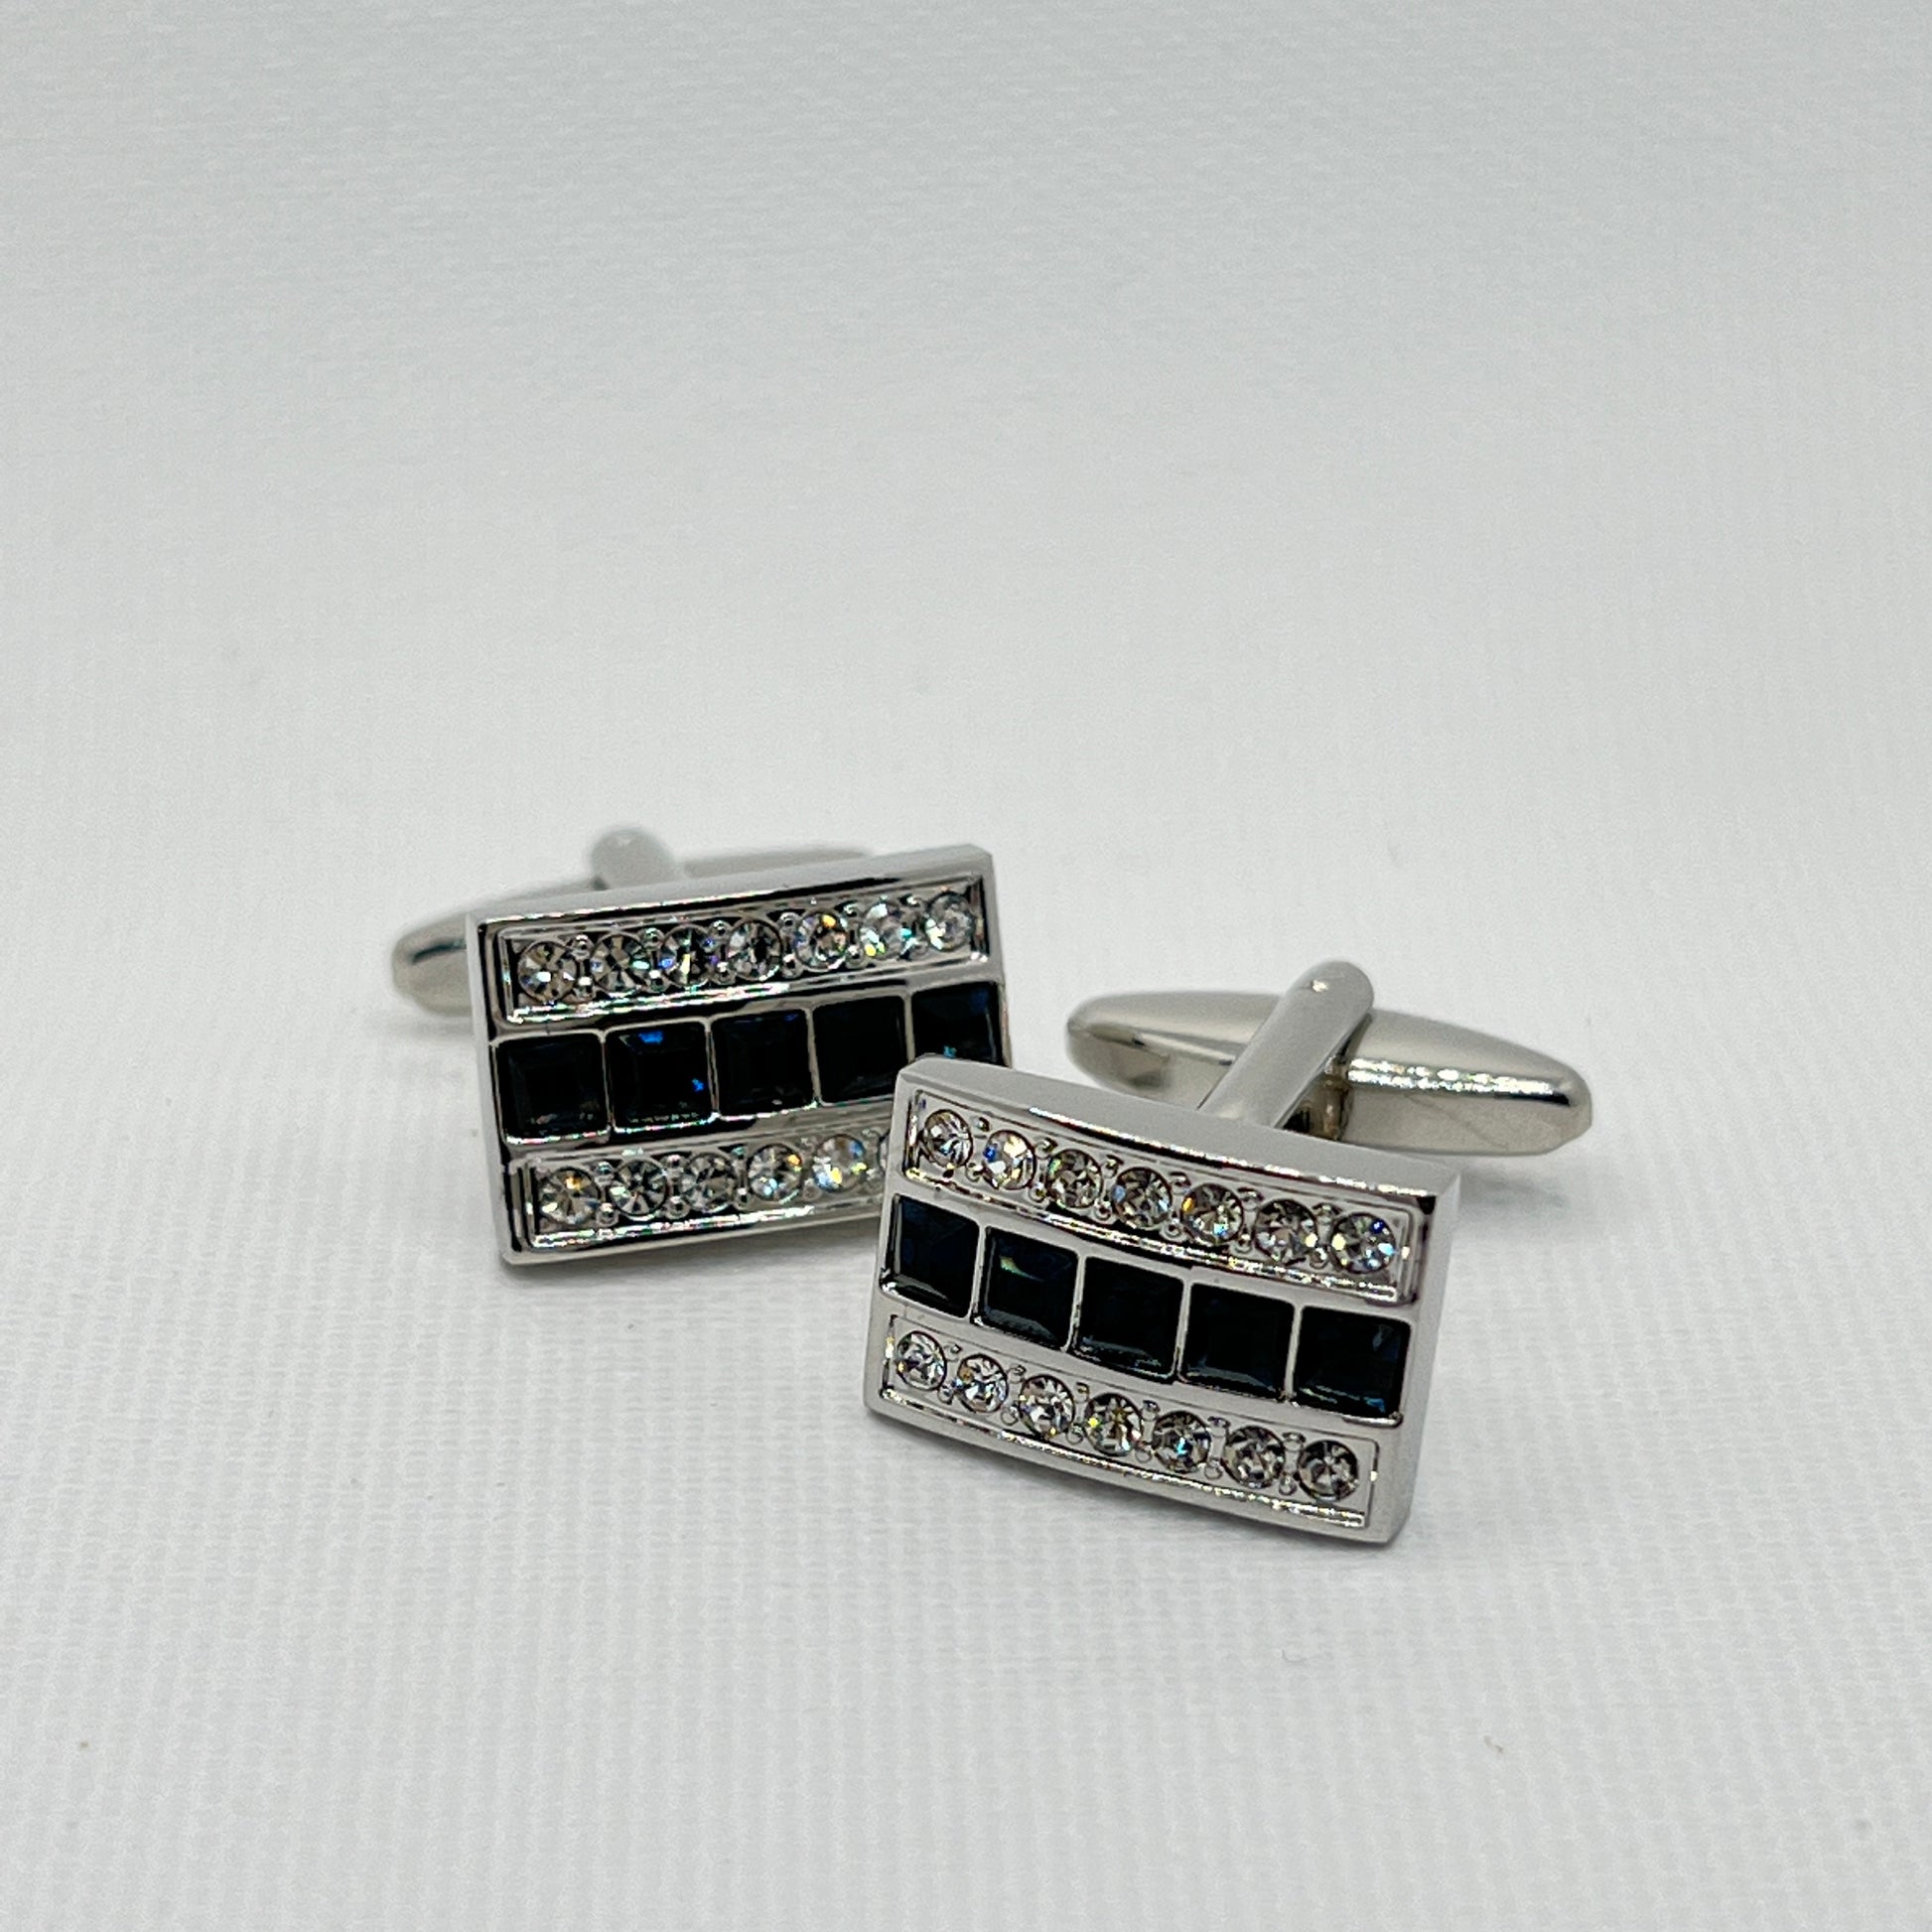 Tasker & Shaw | Luxury Menswear | Rectangular cufflinks with deep blue and clear square crystals